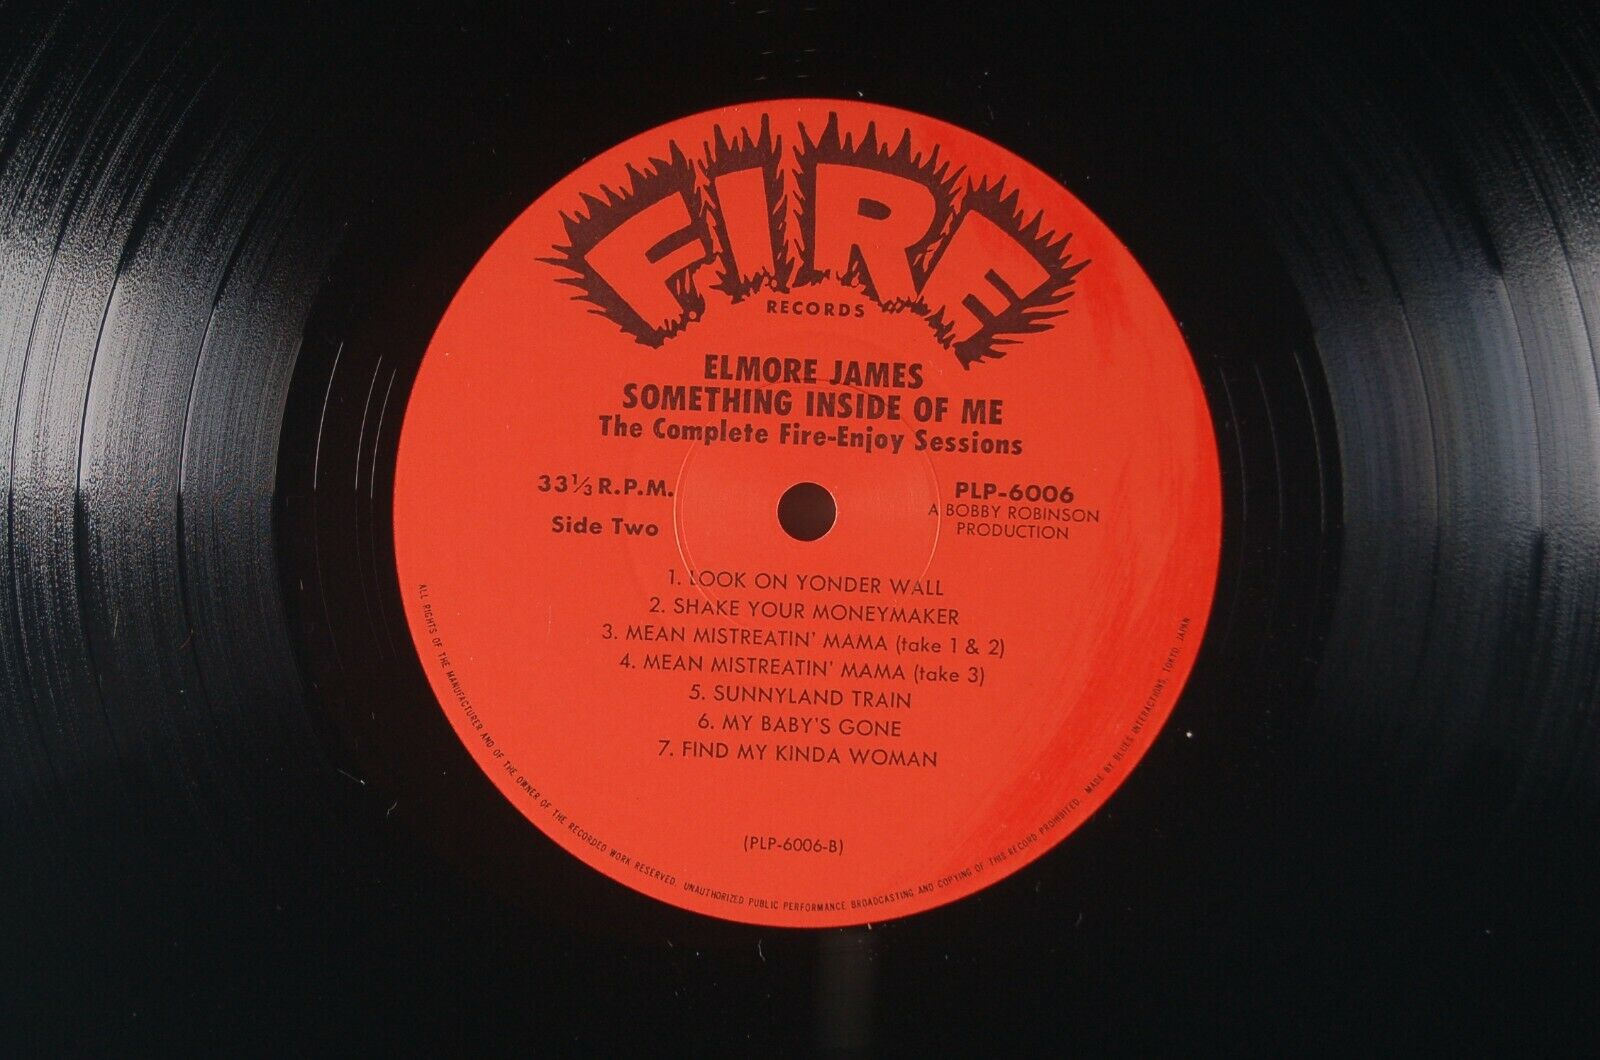 Pic 3 ELMORE JAMES Something Inside of Me, Complete Fire-Enjoy Sessions FIRE  MINT